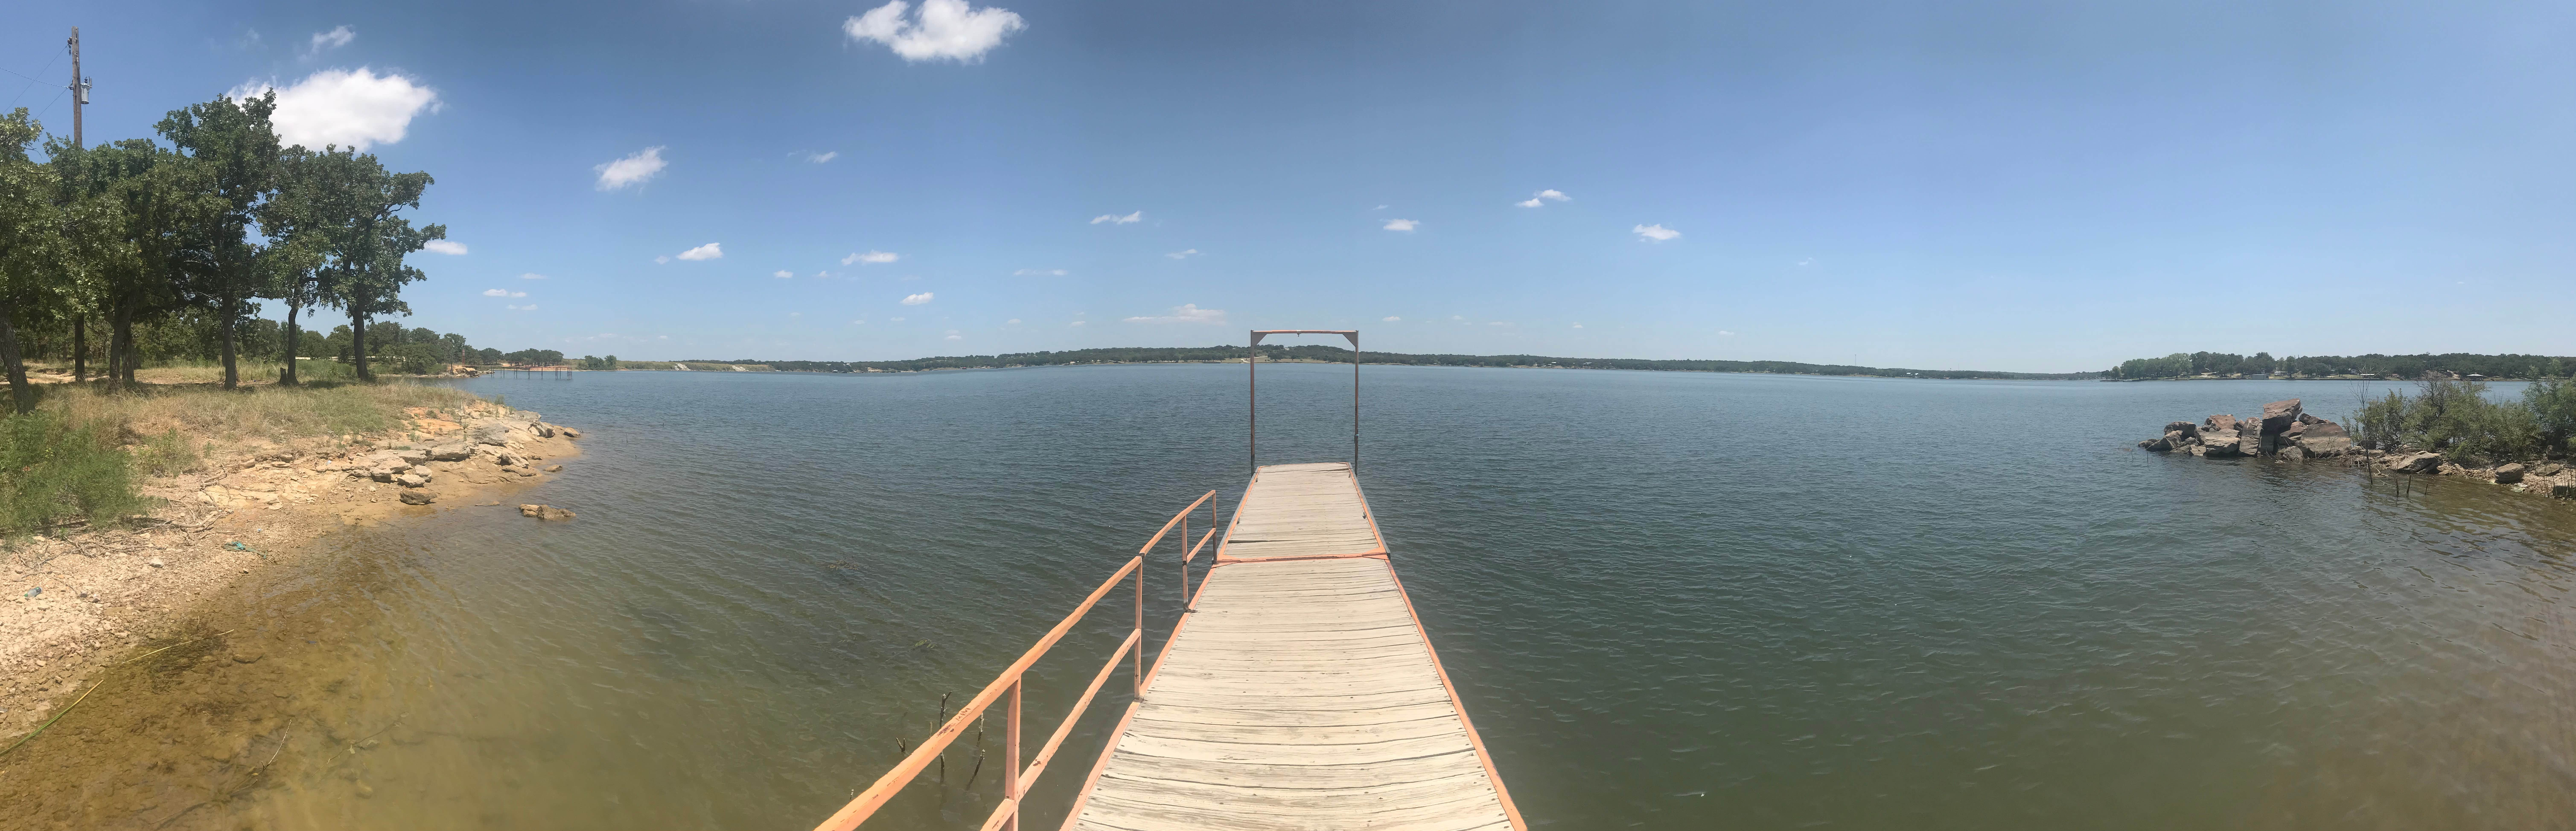 This is a view from the dock and launch area